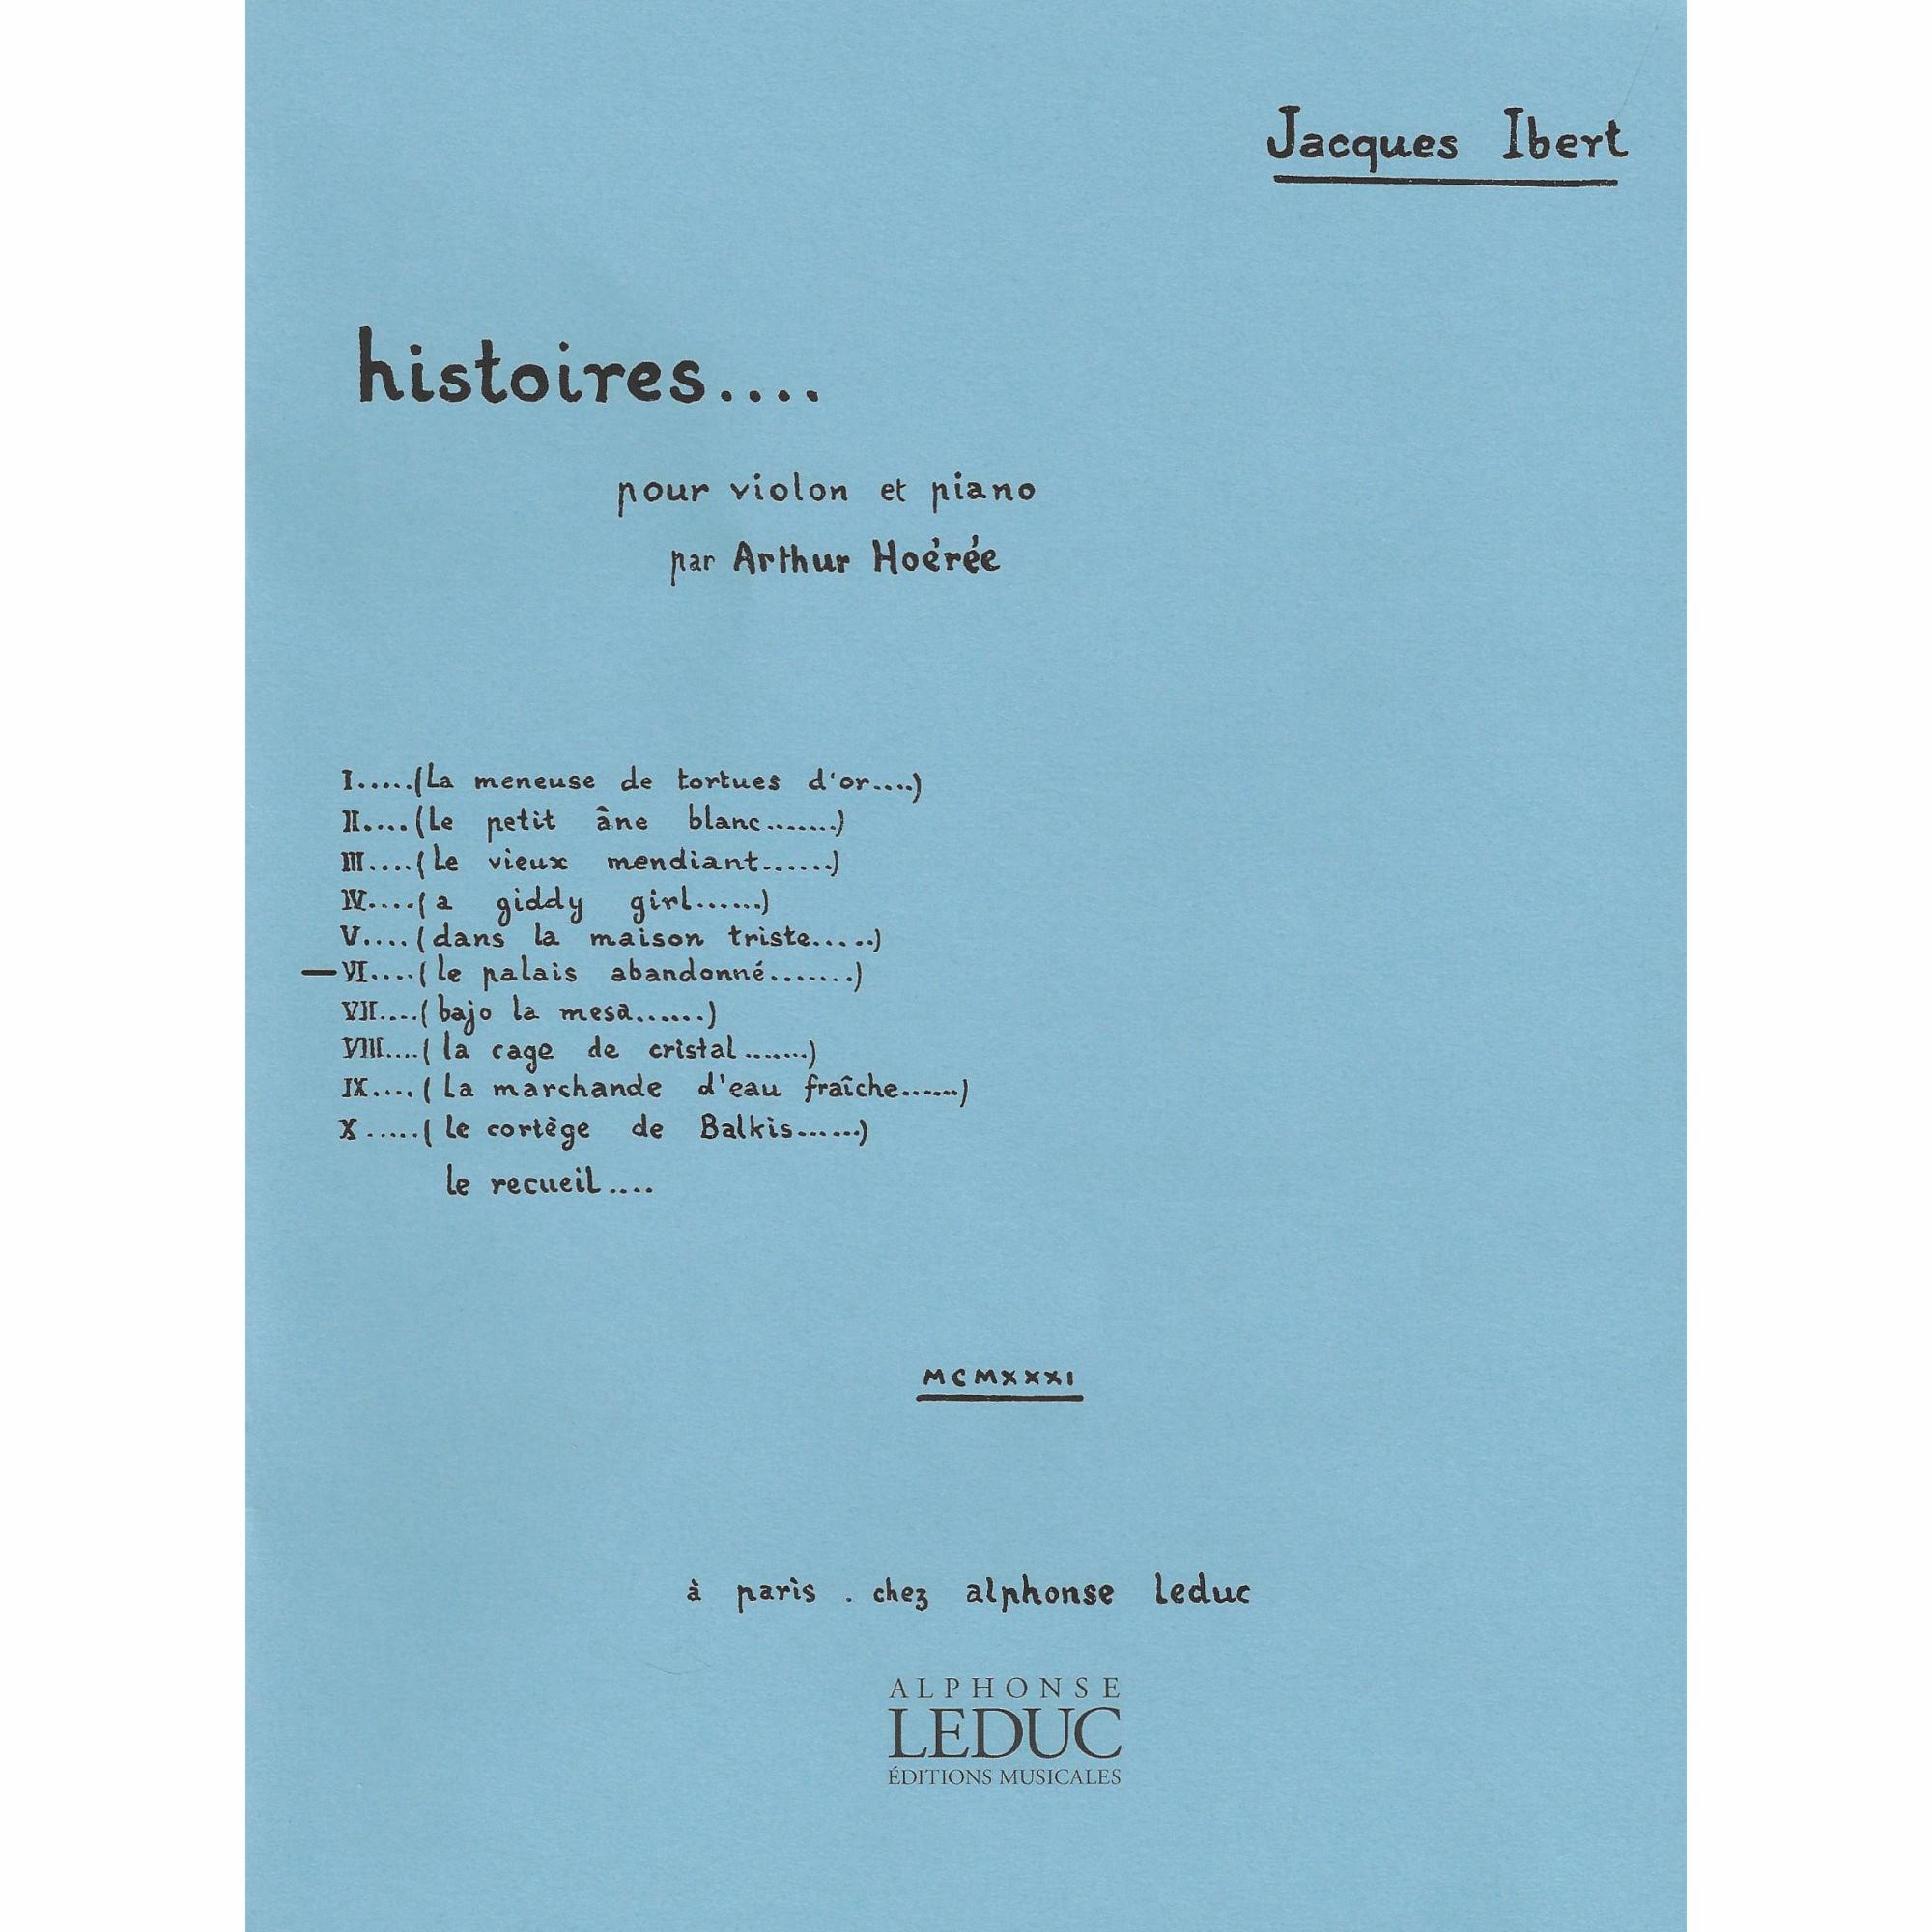 Ibert -- La palais abandonne, from Histoires for Violin and Piano